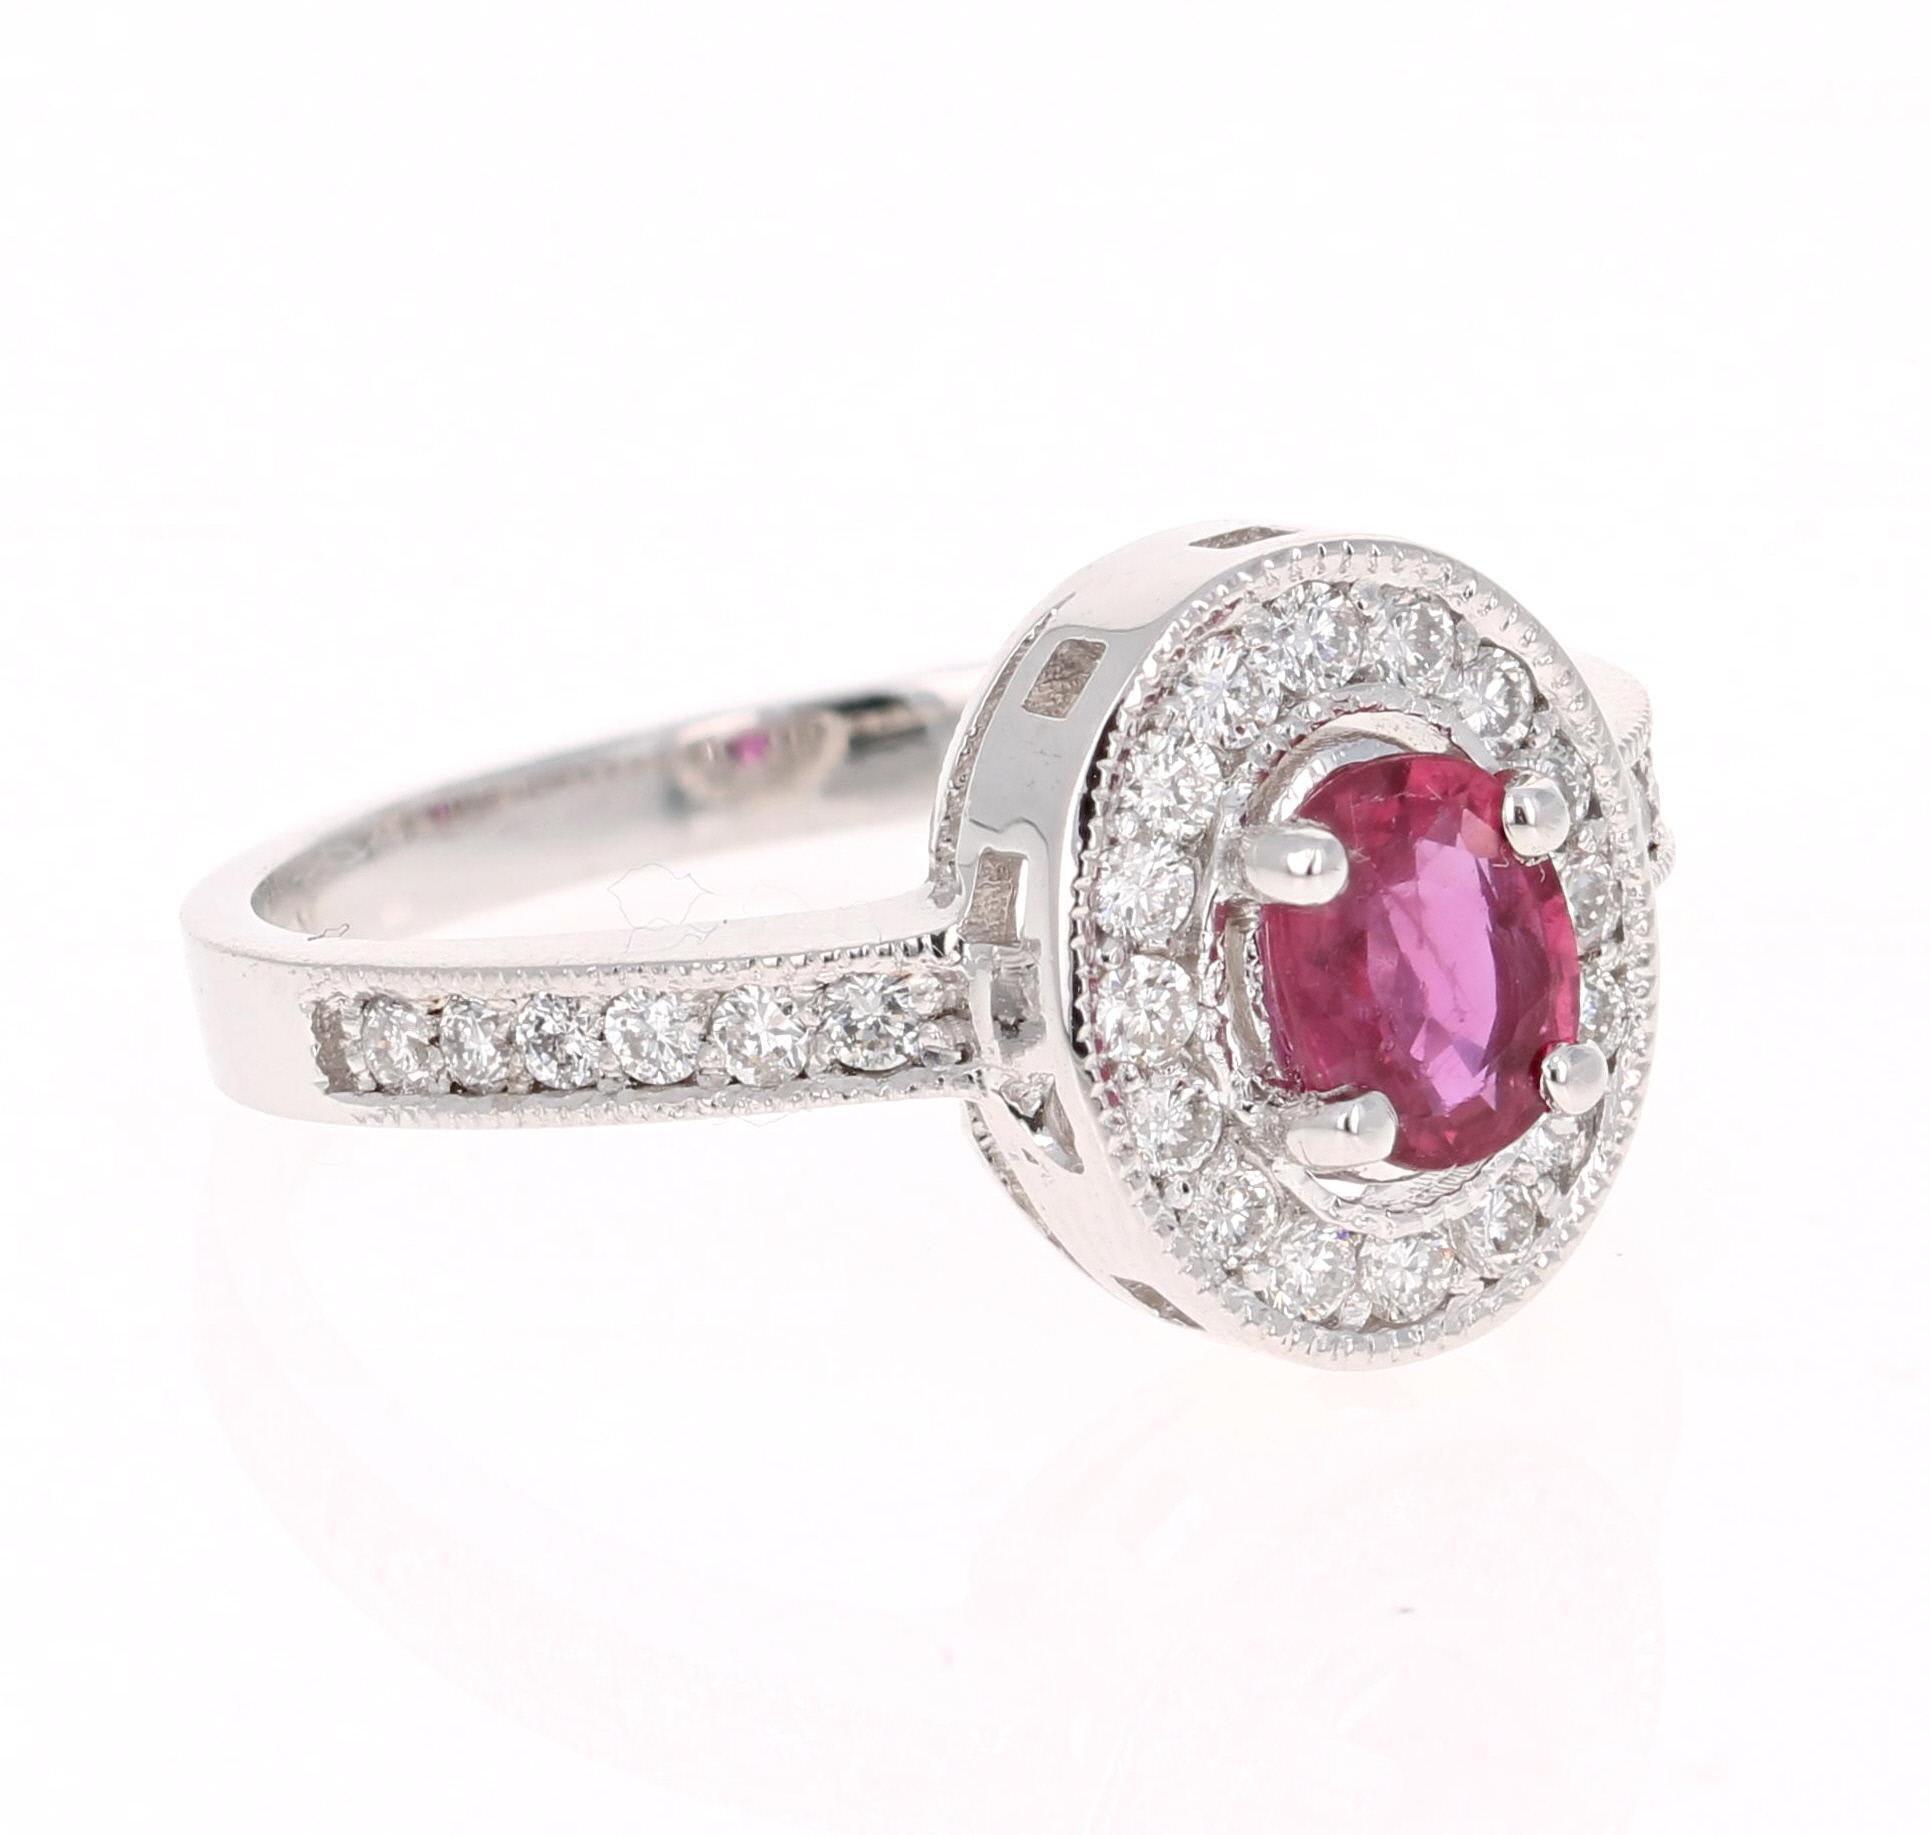 Simply beautiful Ruby Diamond Ring with a Oval Cut 0.54 Carat Burmese Ruby which is surrounded by 28 Round Cut Diamonds that weigh 0.37 carats. The total carat weight of the ring is 0.91 carats. The clarity and color of the diamonds are SI1-F.

The